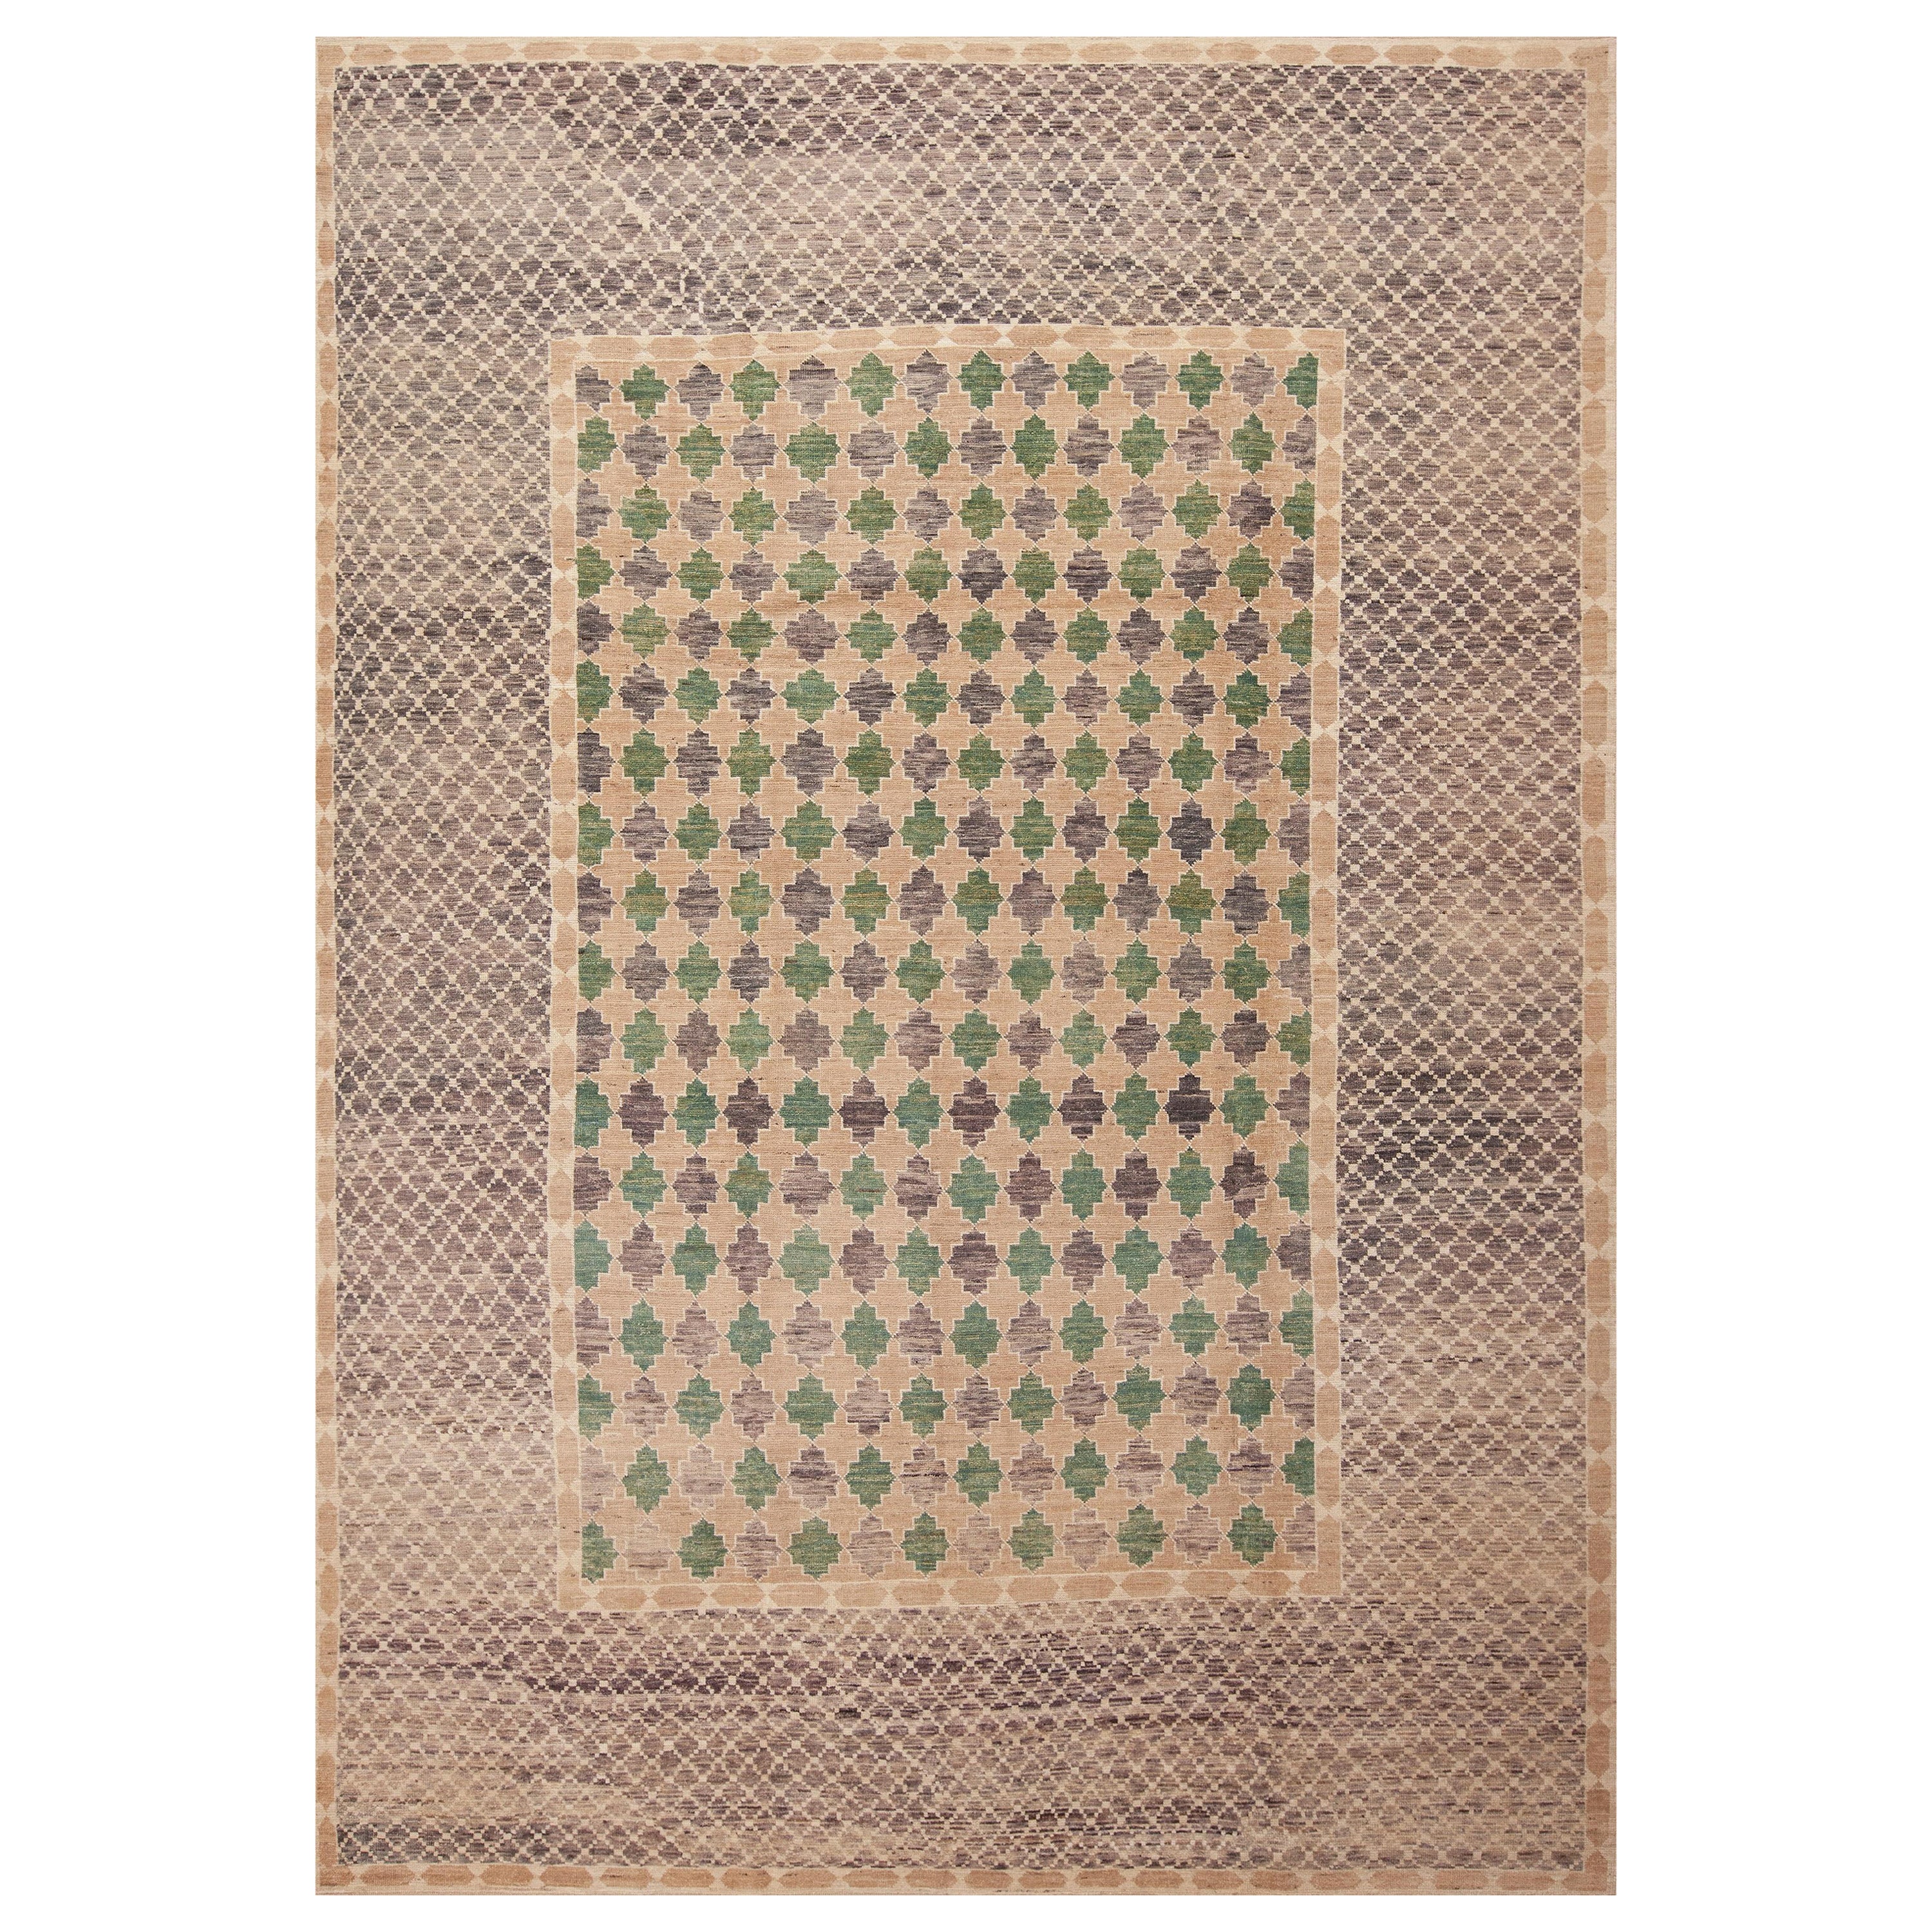 Nazmiyal Collection Mid-Century Modern Inspired Design Rug 9'3" x 13' For Sale